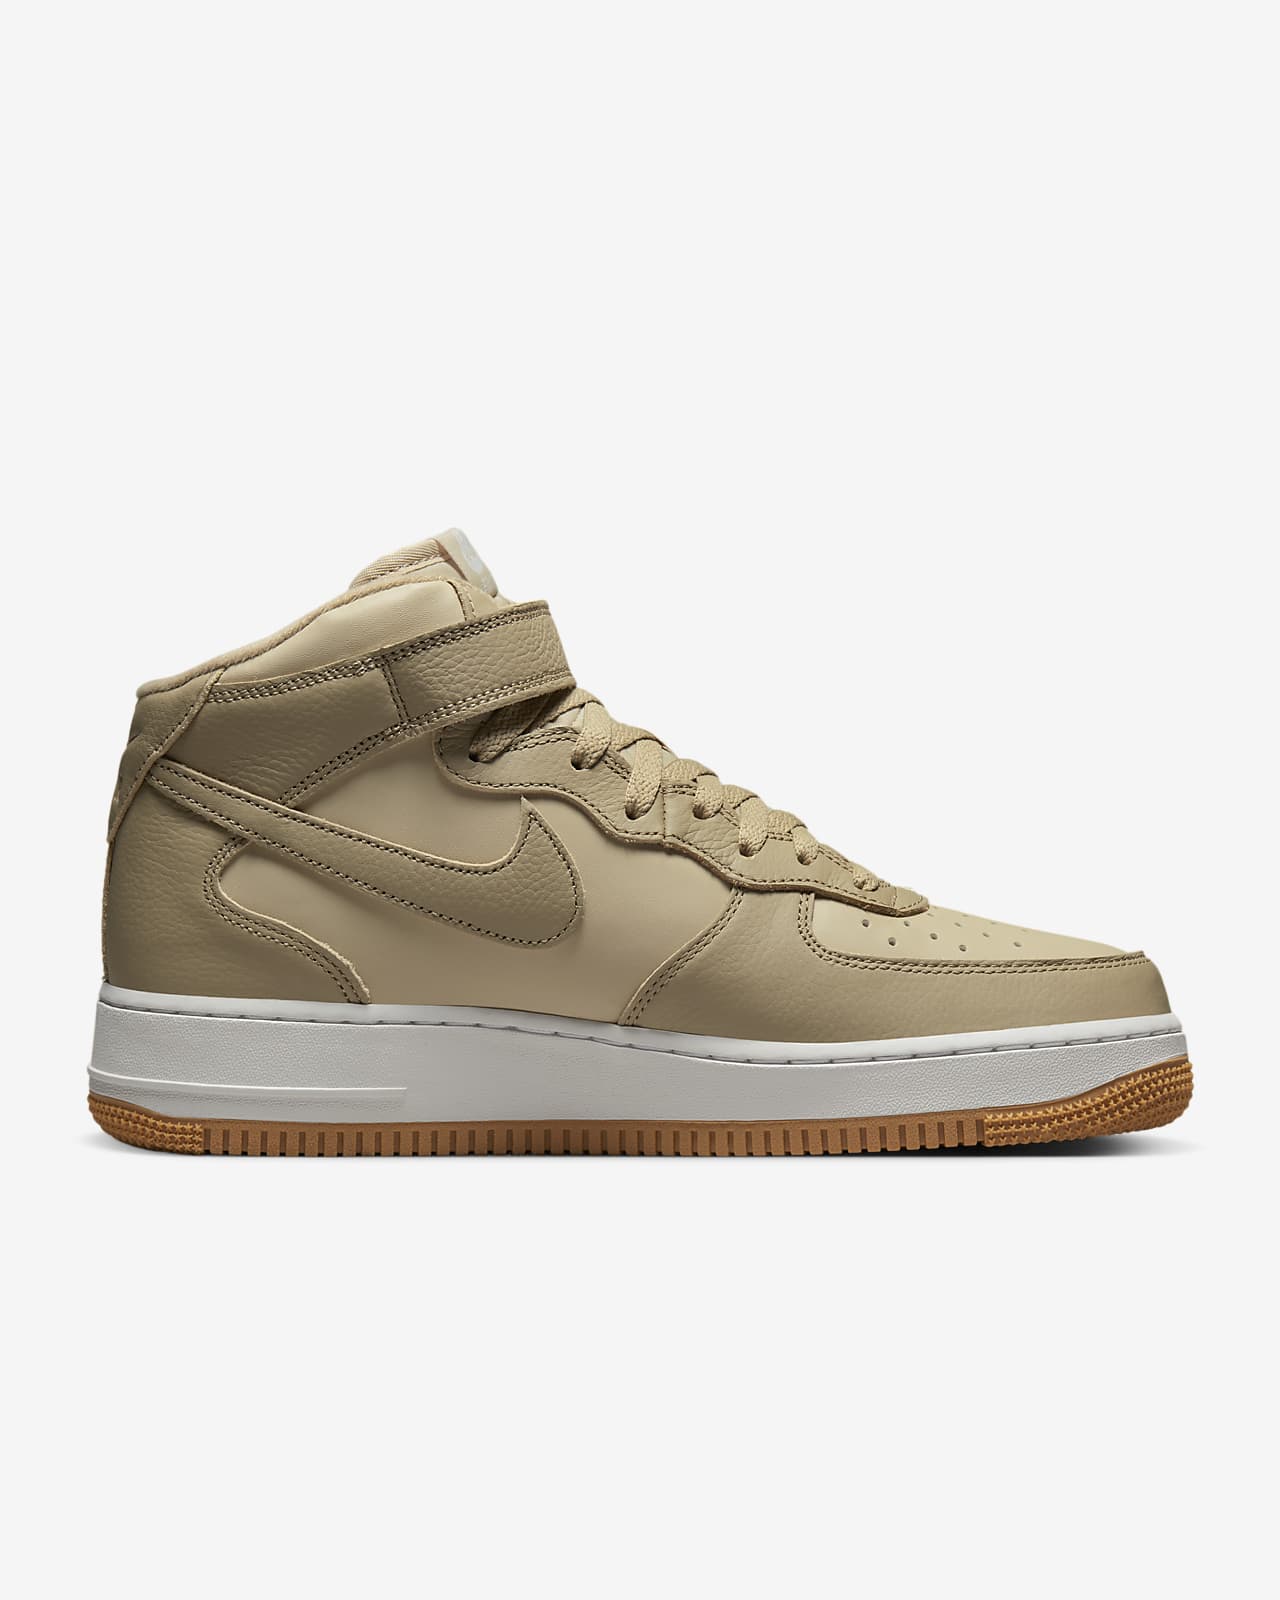 Nike Air Force 1 Mid '07 LX Men's Shoes